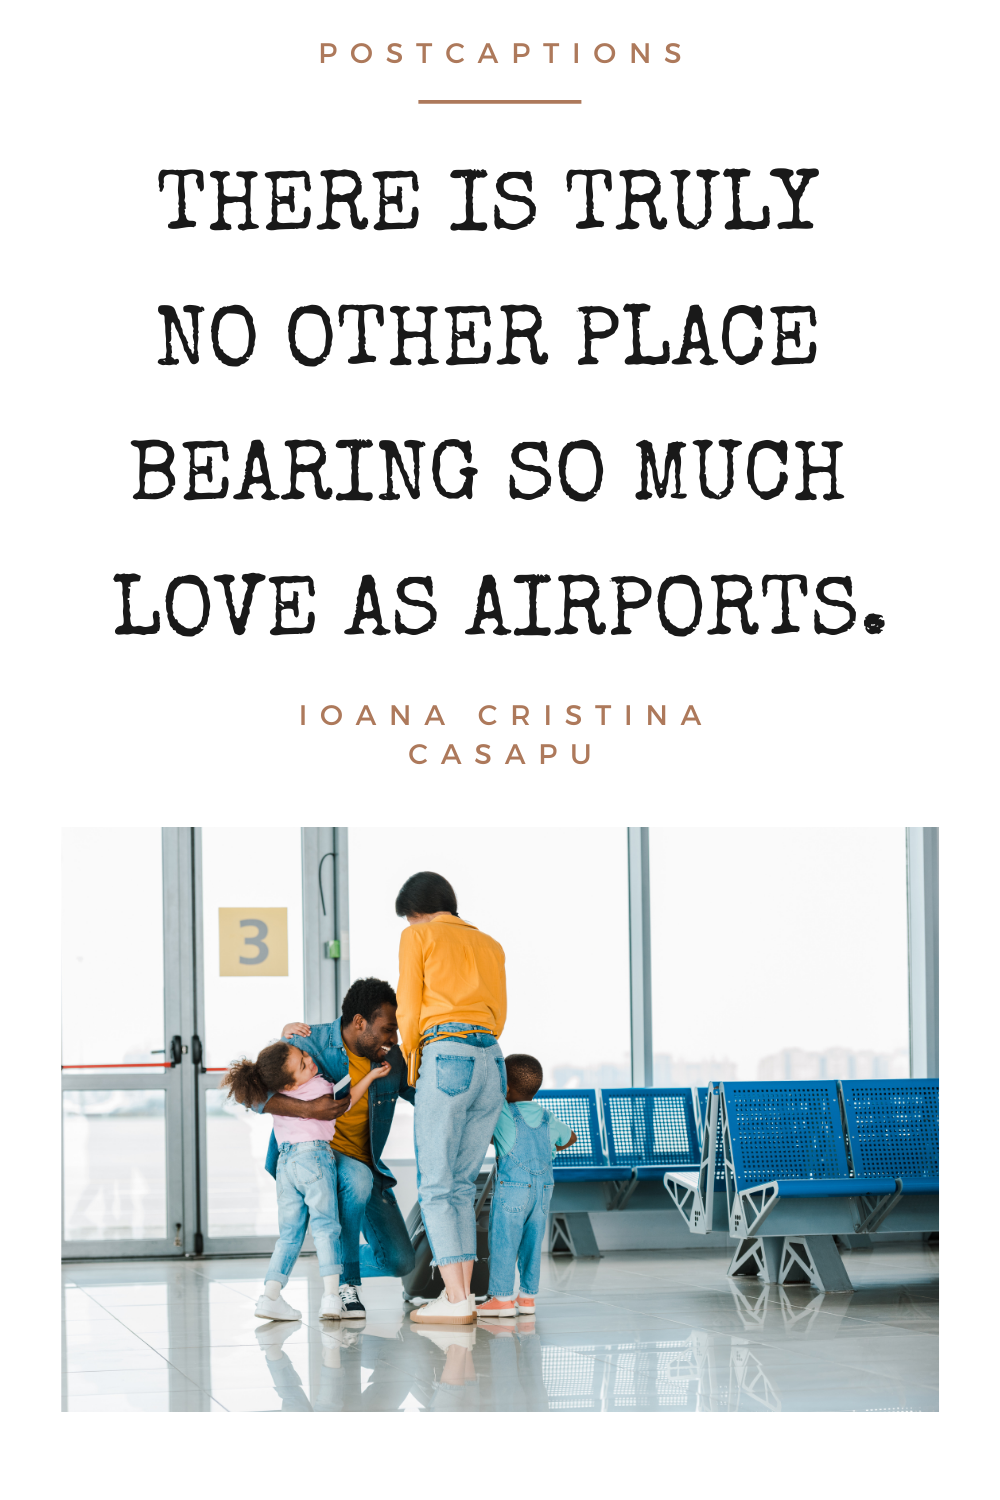 Airport quotes for Instagram